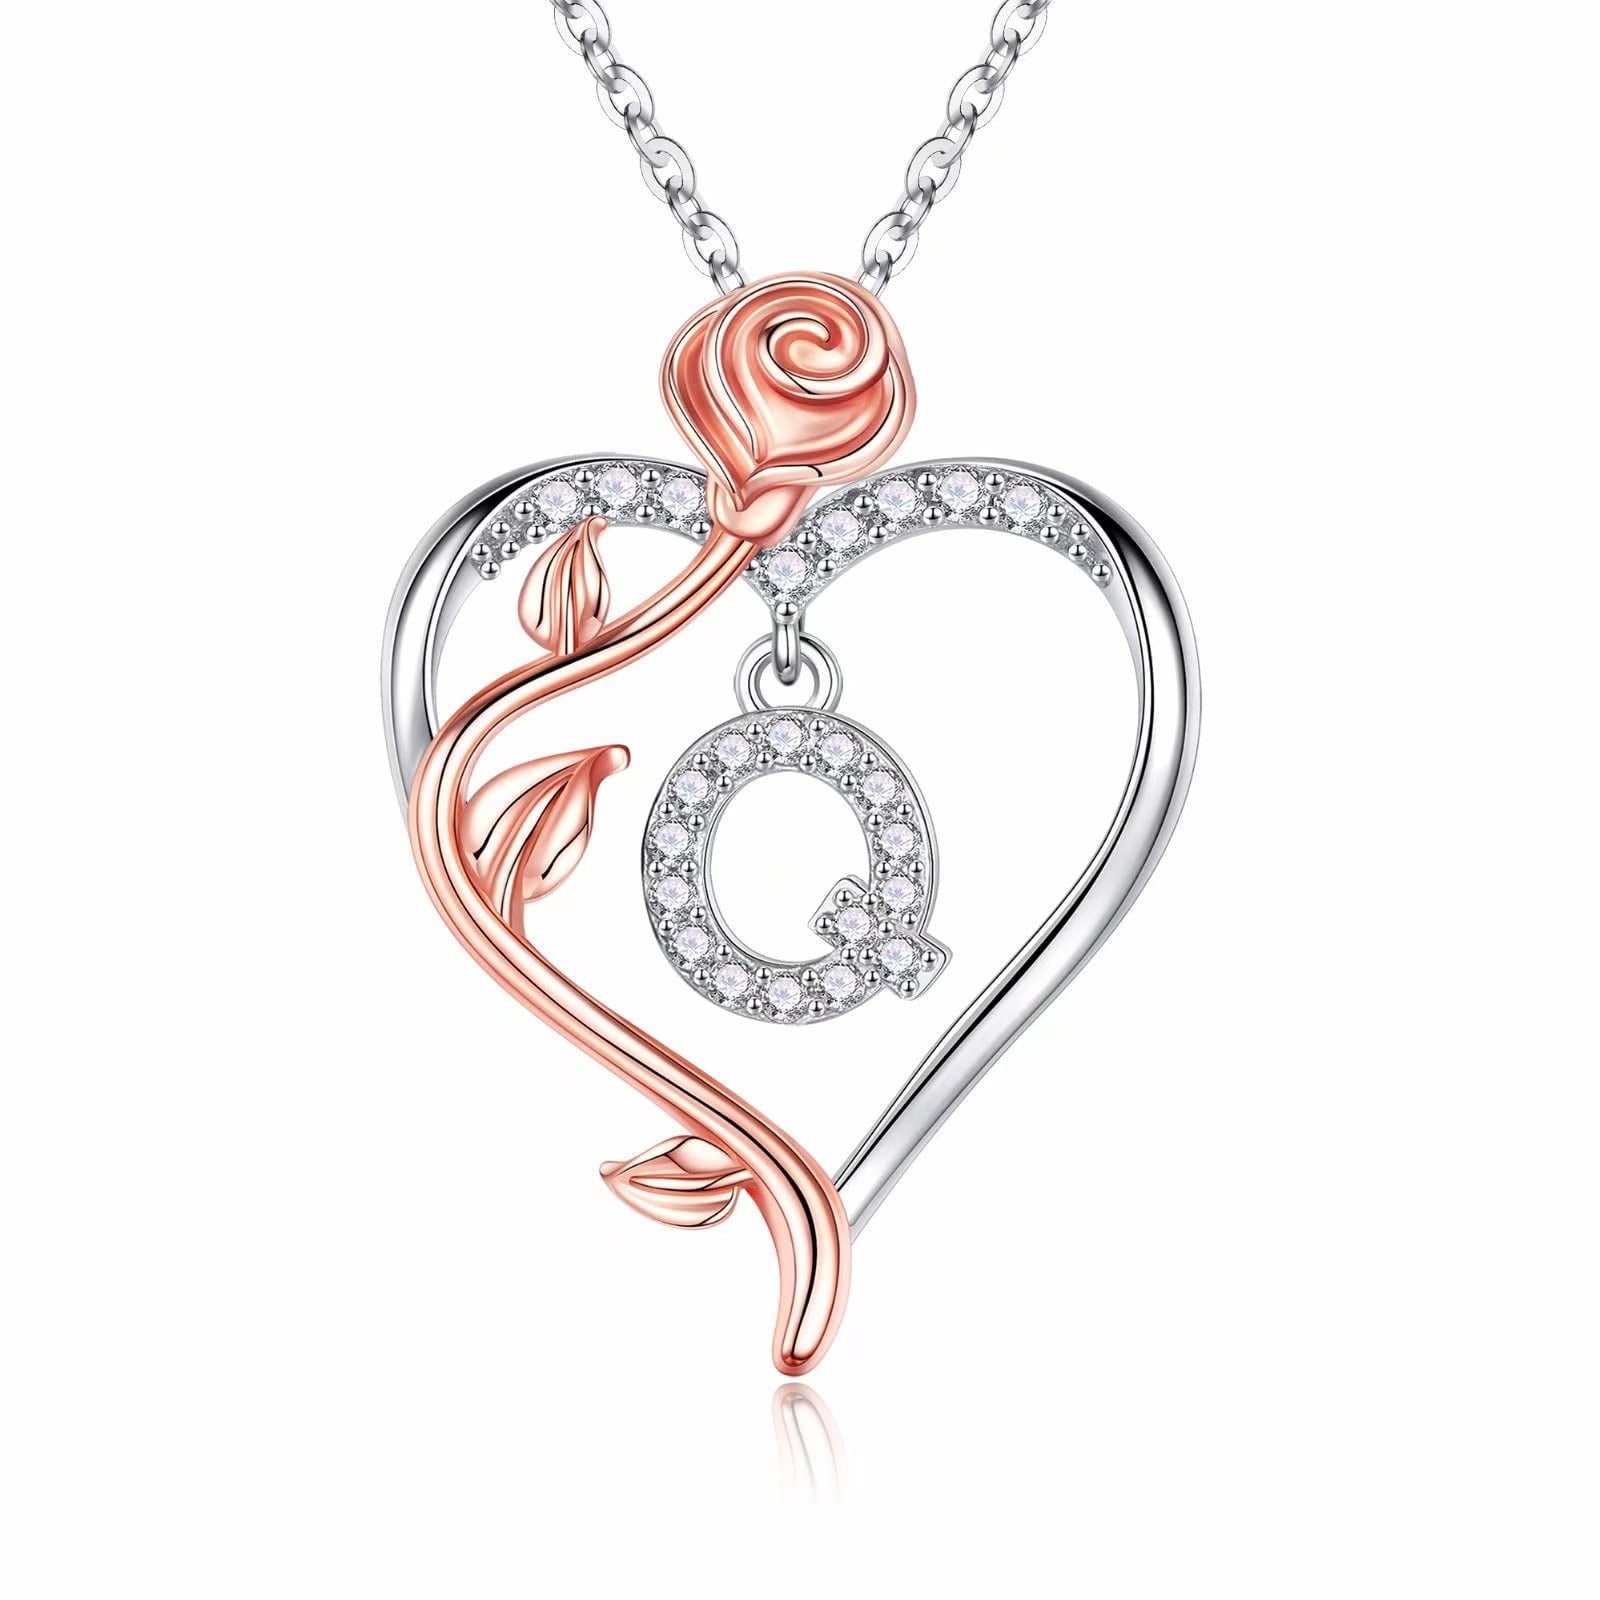 AUNOOL Mothers Day Gifts Rose Heart Necklace for Women S925